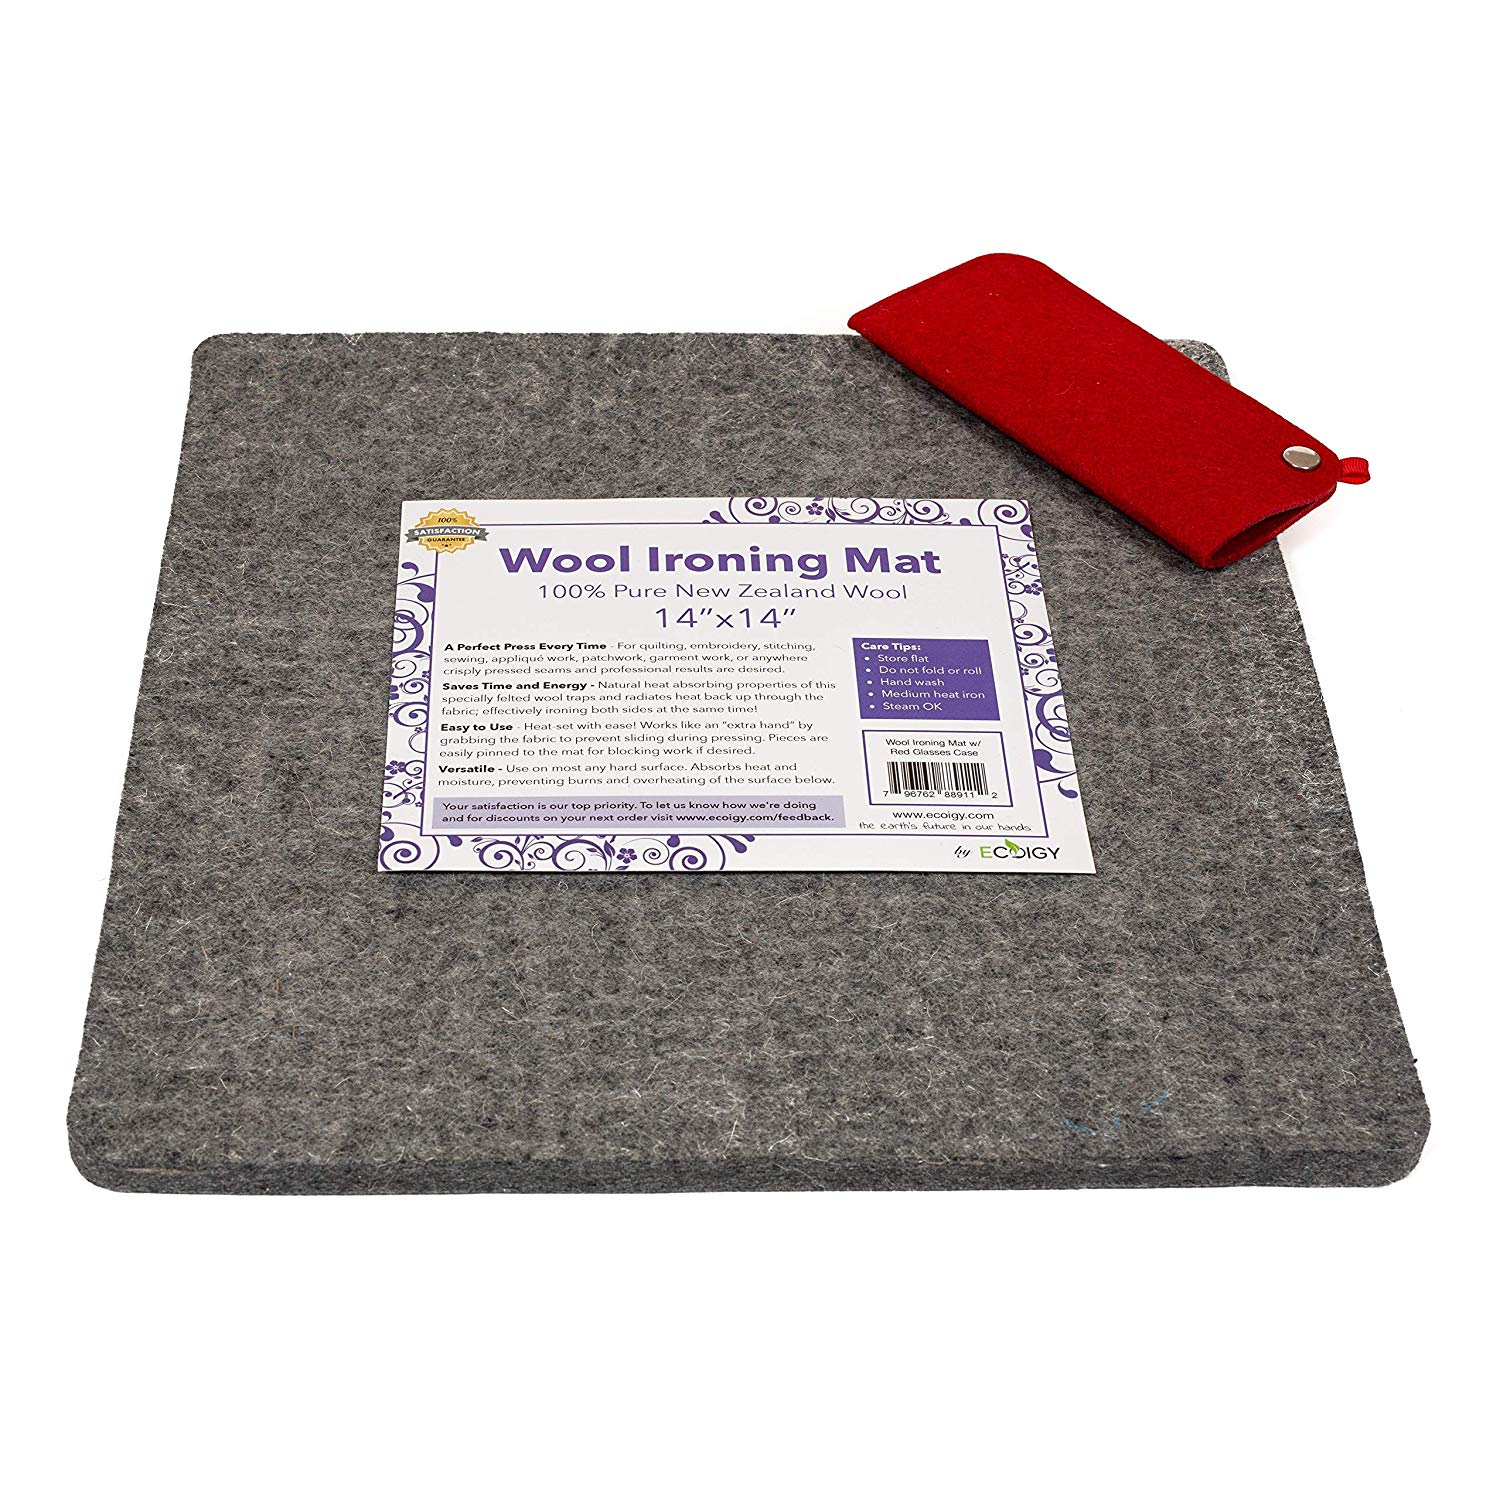 Wool Ironing Mat Wool pressing mat Wool Pressing Pad Wool For Professional Ironing Portable Quilting Heat Press Pad For Traveling College Top Craft Sewing Ironing Pad 10x10in/12x14in/12x18in